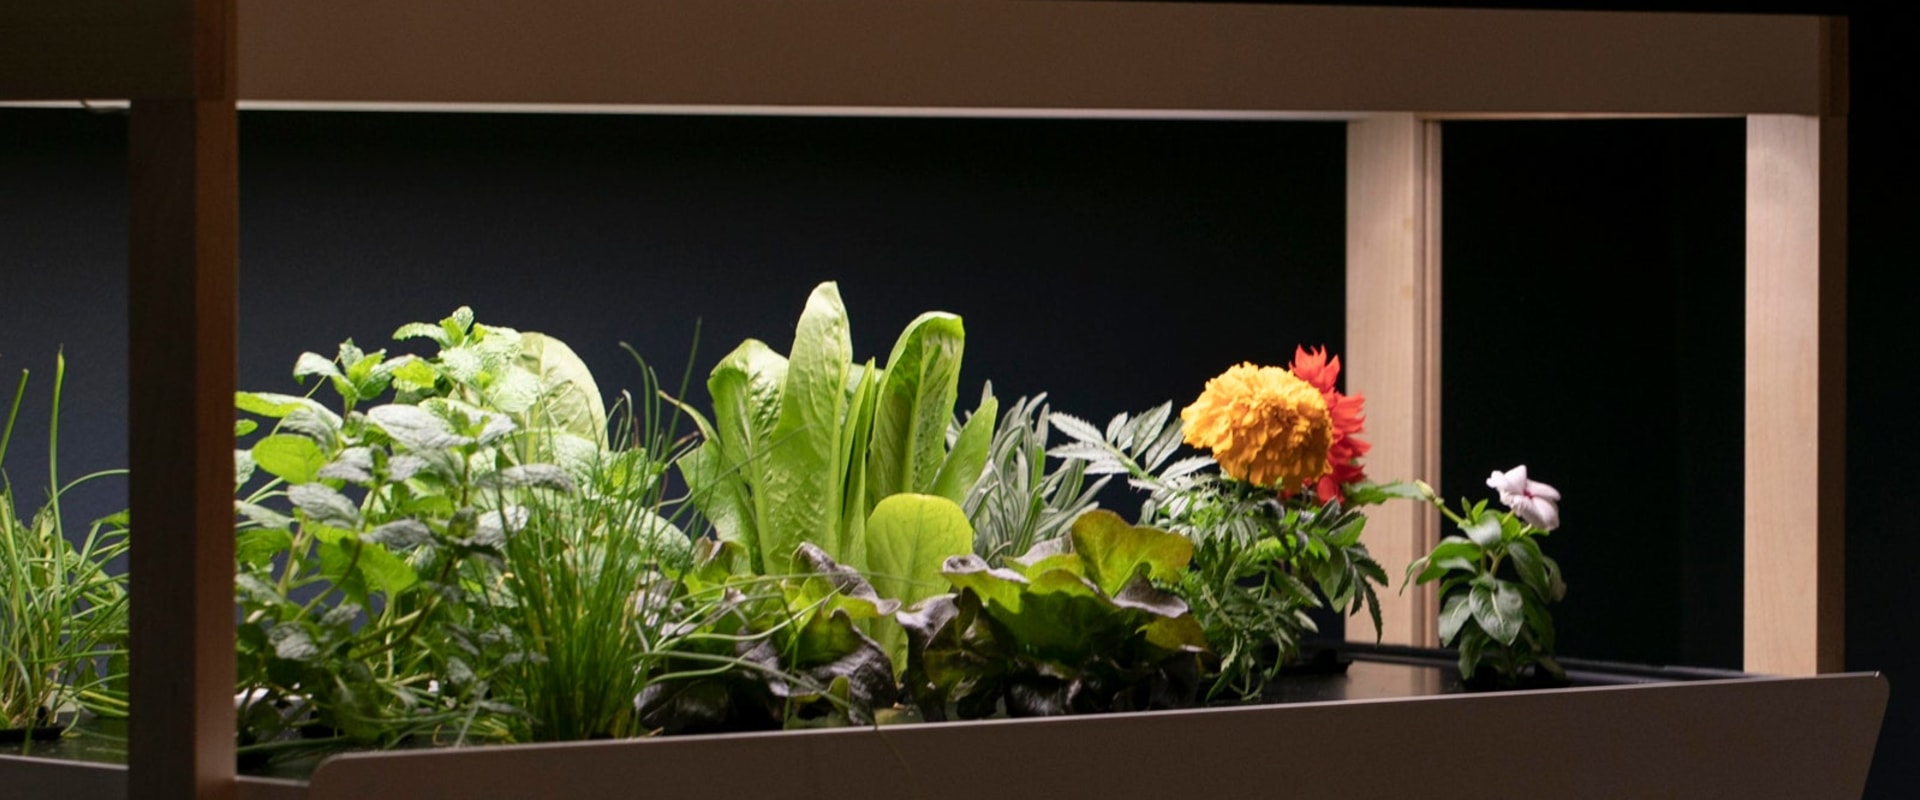 Hydroponic Systems for Small Spaces: Maximize Your Indoor Gardening Potential